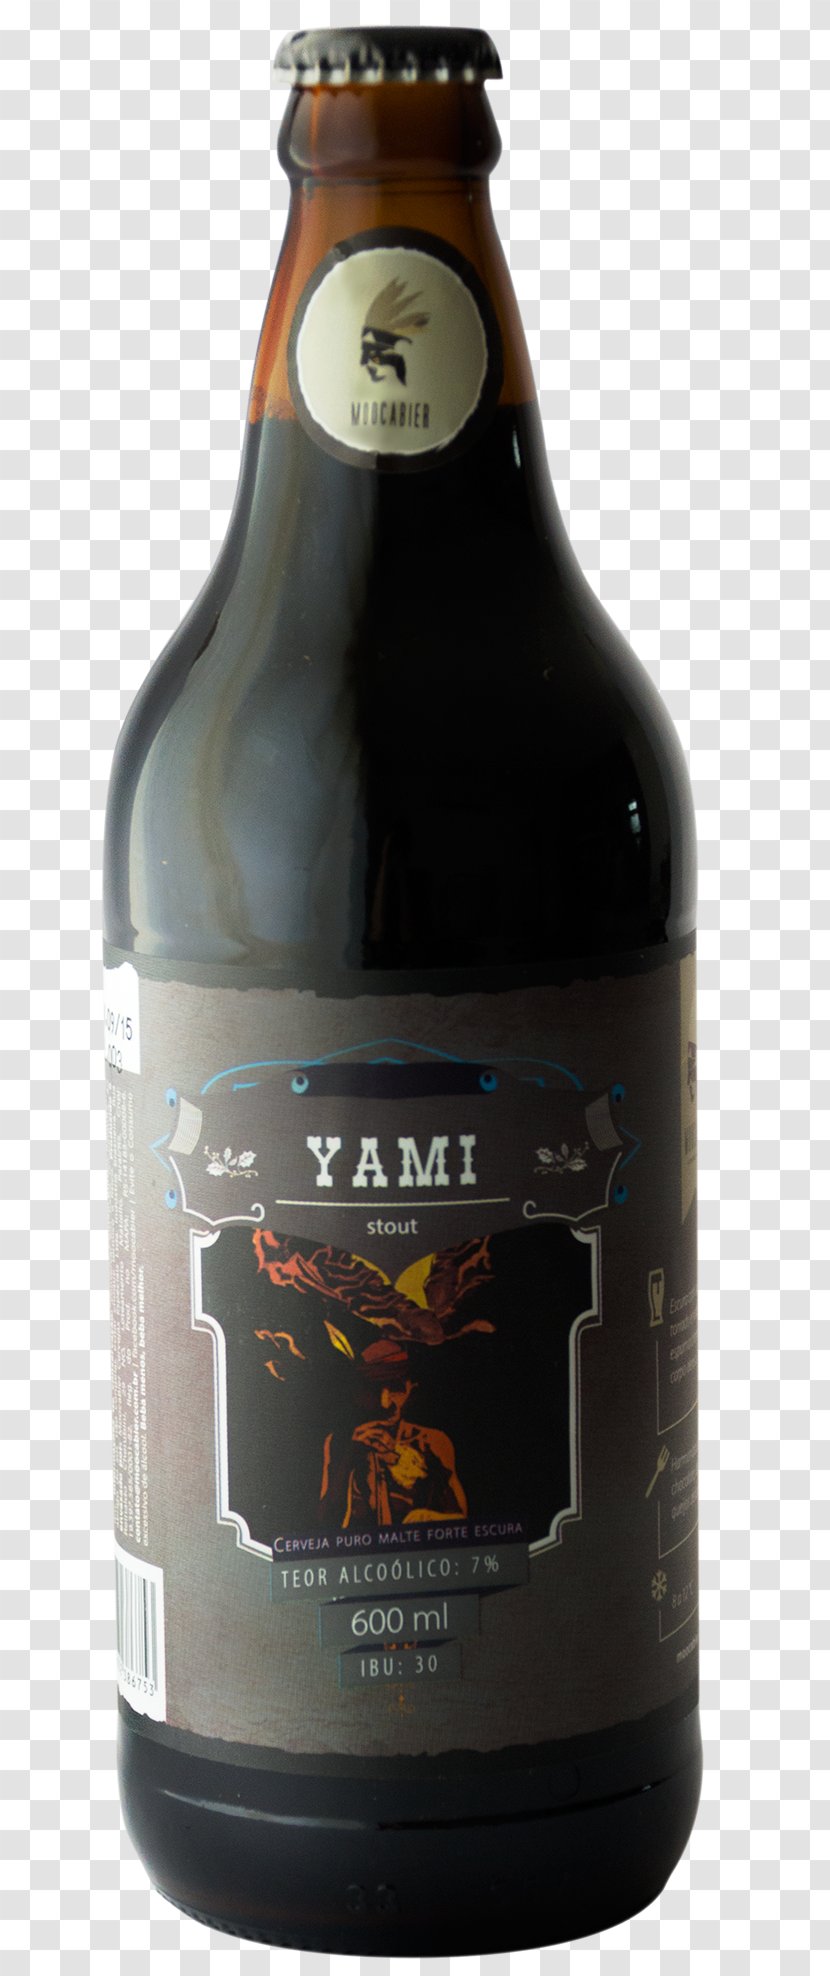 Ale Stout Beer Bottle Young's Transparent PNG